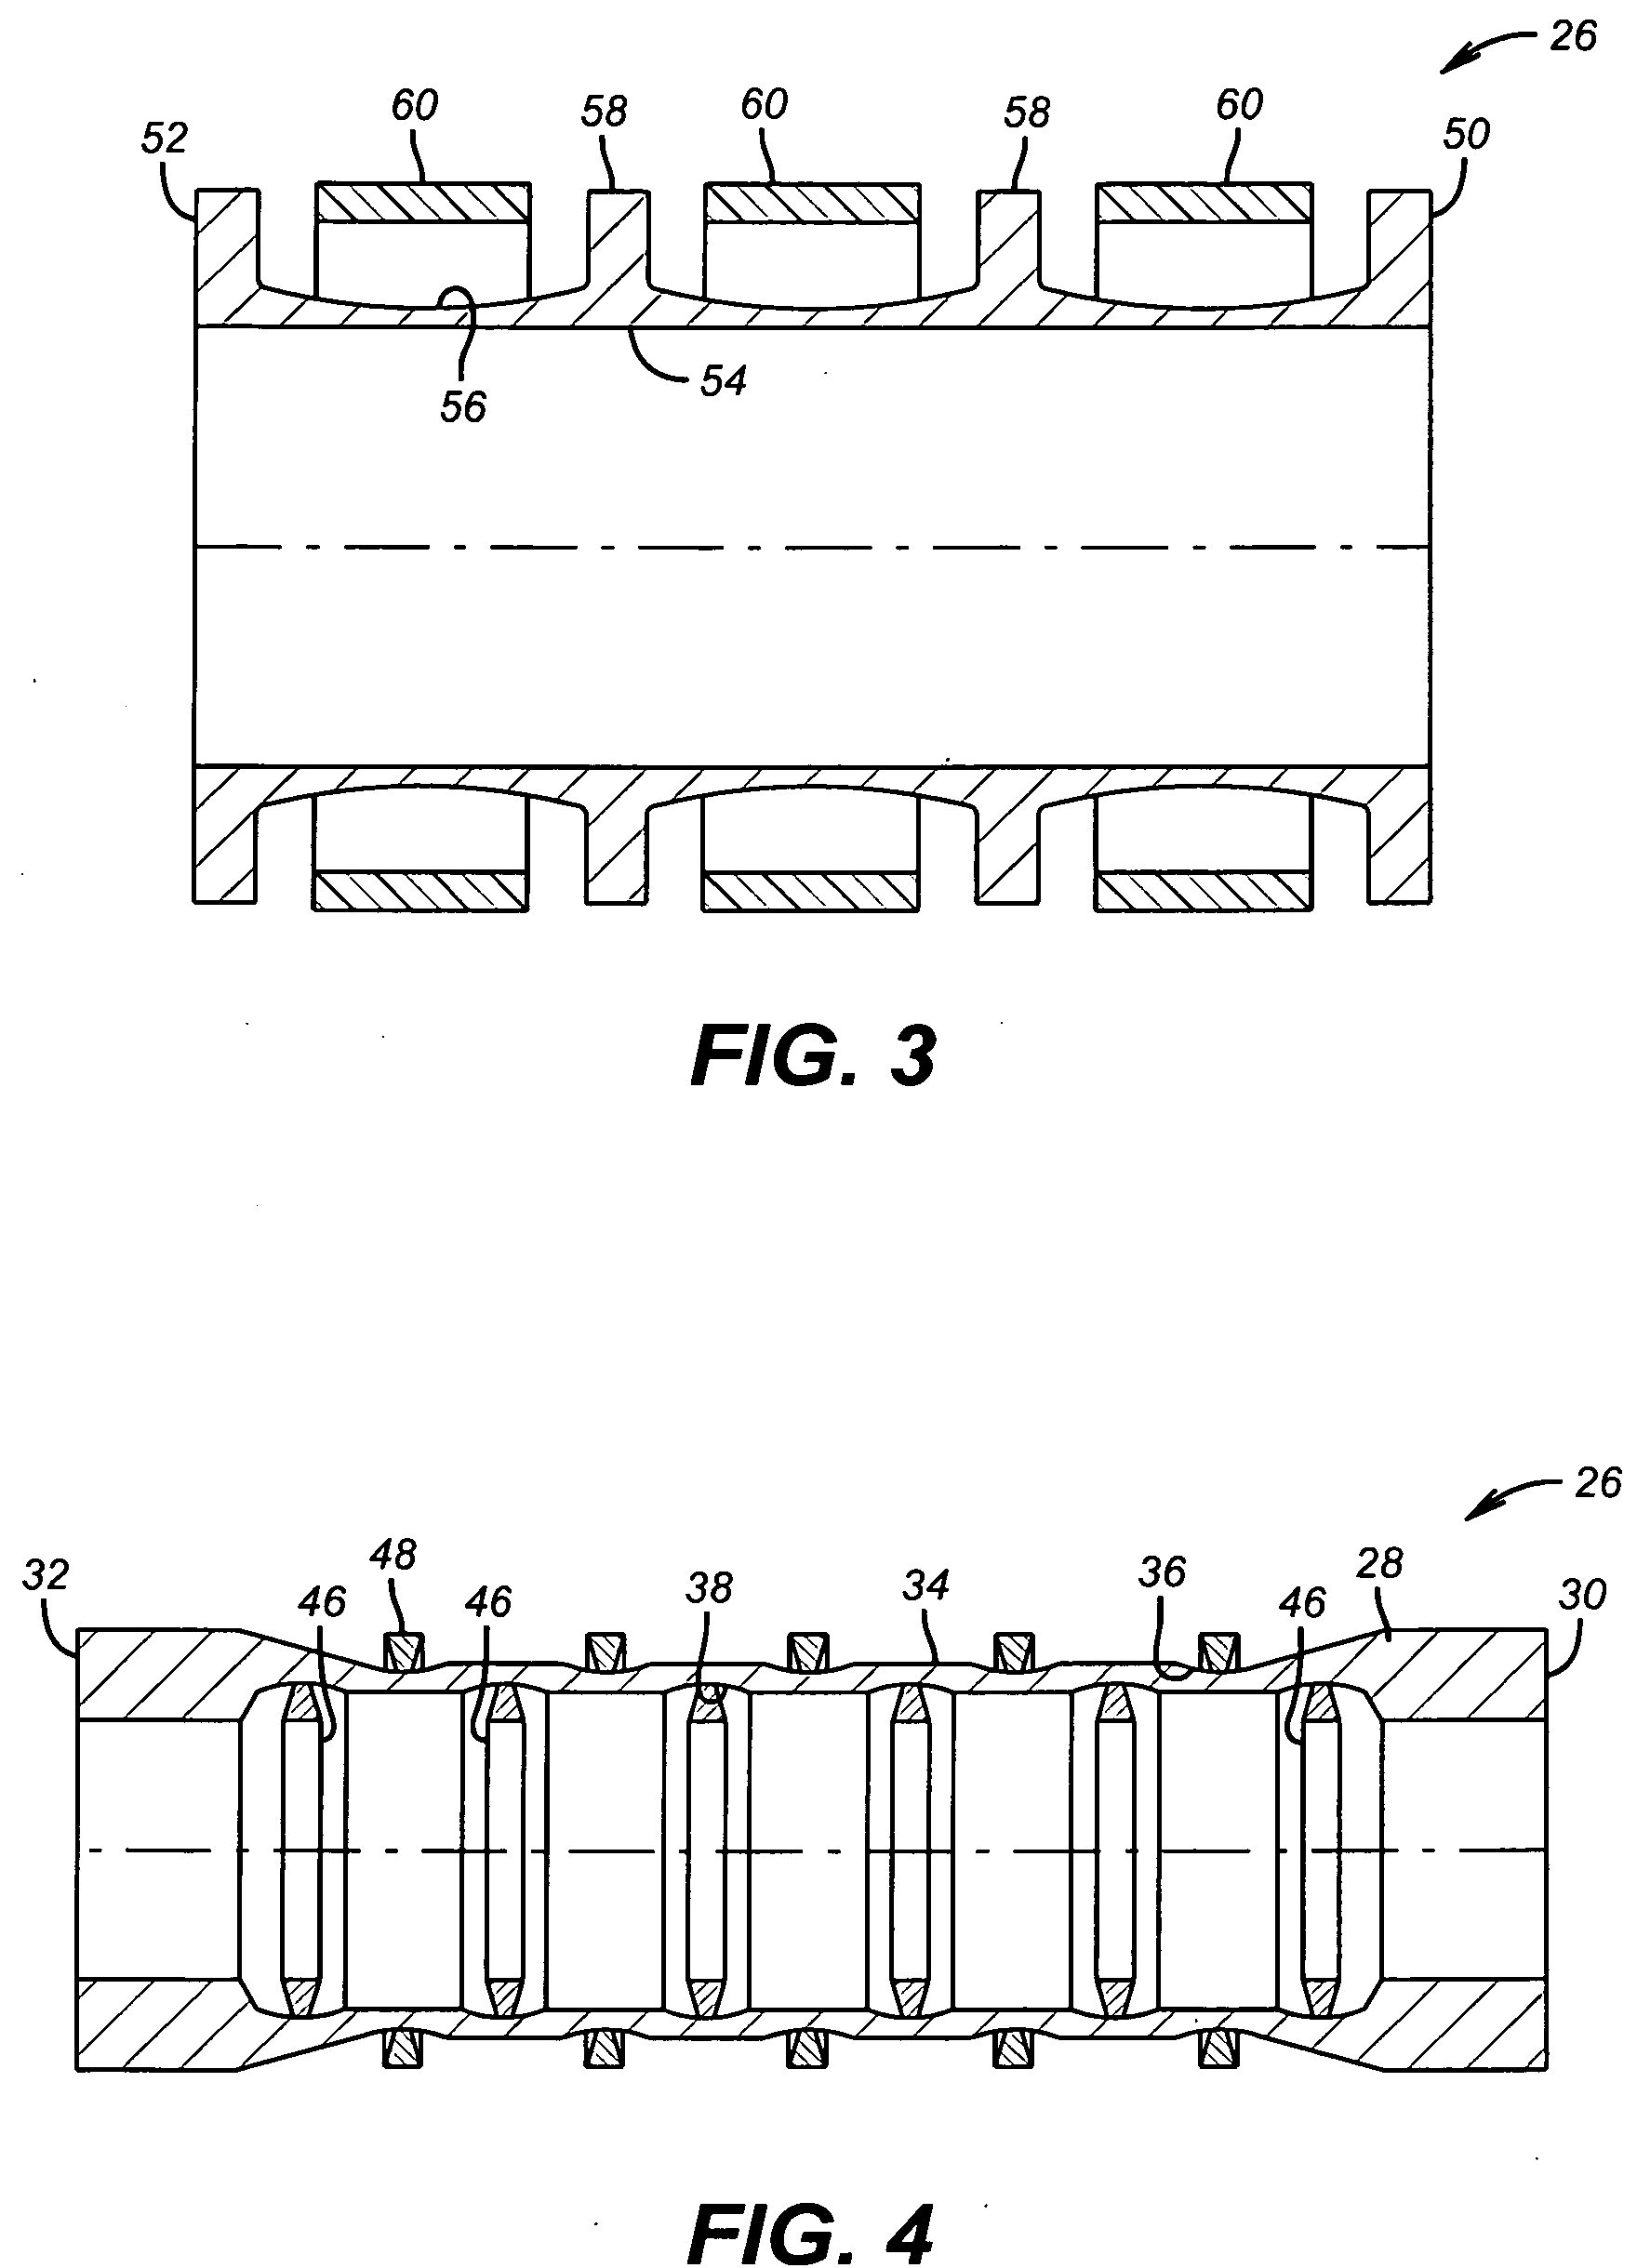 Cylindrical Spring Fabricated by Compressive Force